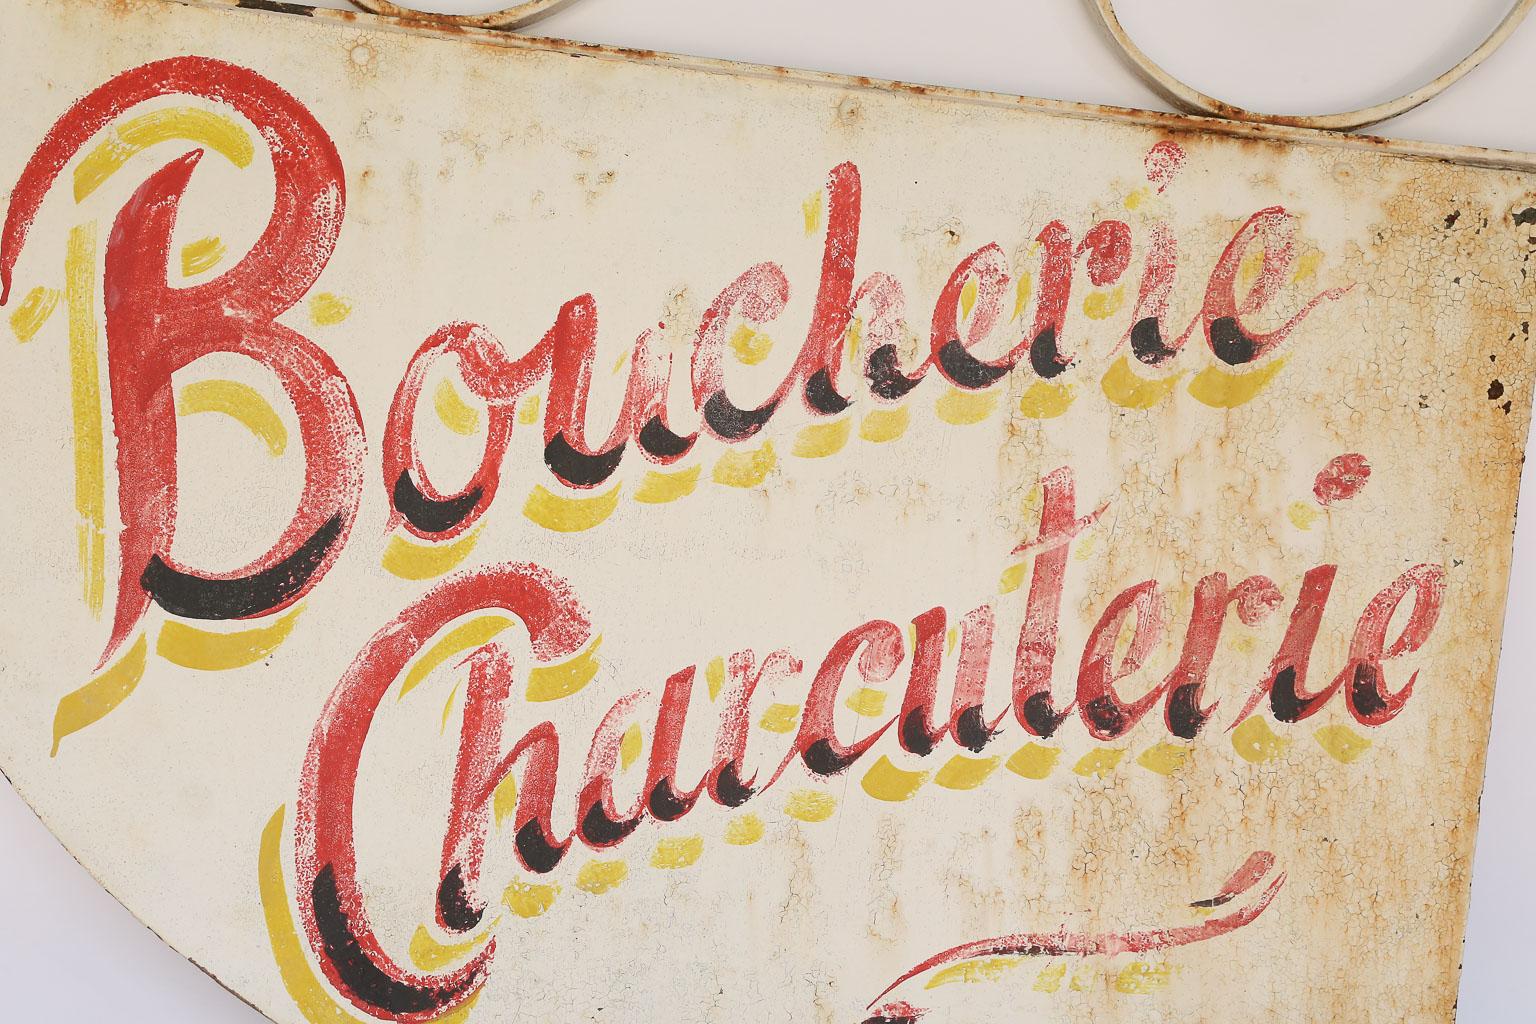 This is a hand painted Boucherie Charcuterie French sign. It once hung in a French butcher shop. French to English translation: Boucherie - Butchery; Charcuterie - Delicatessen. This piece is perfect for a kitchen or restaurant.